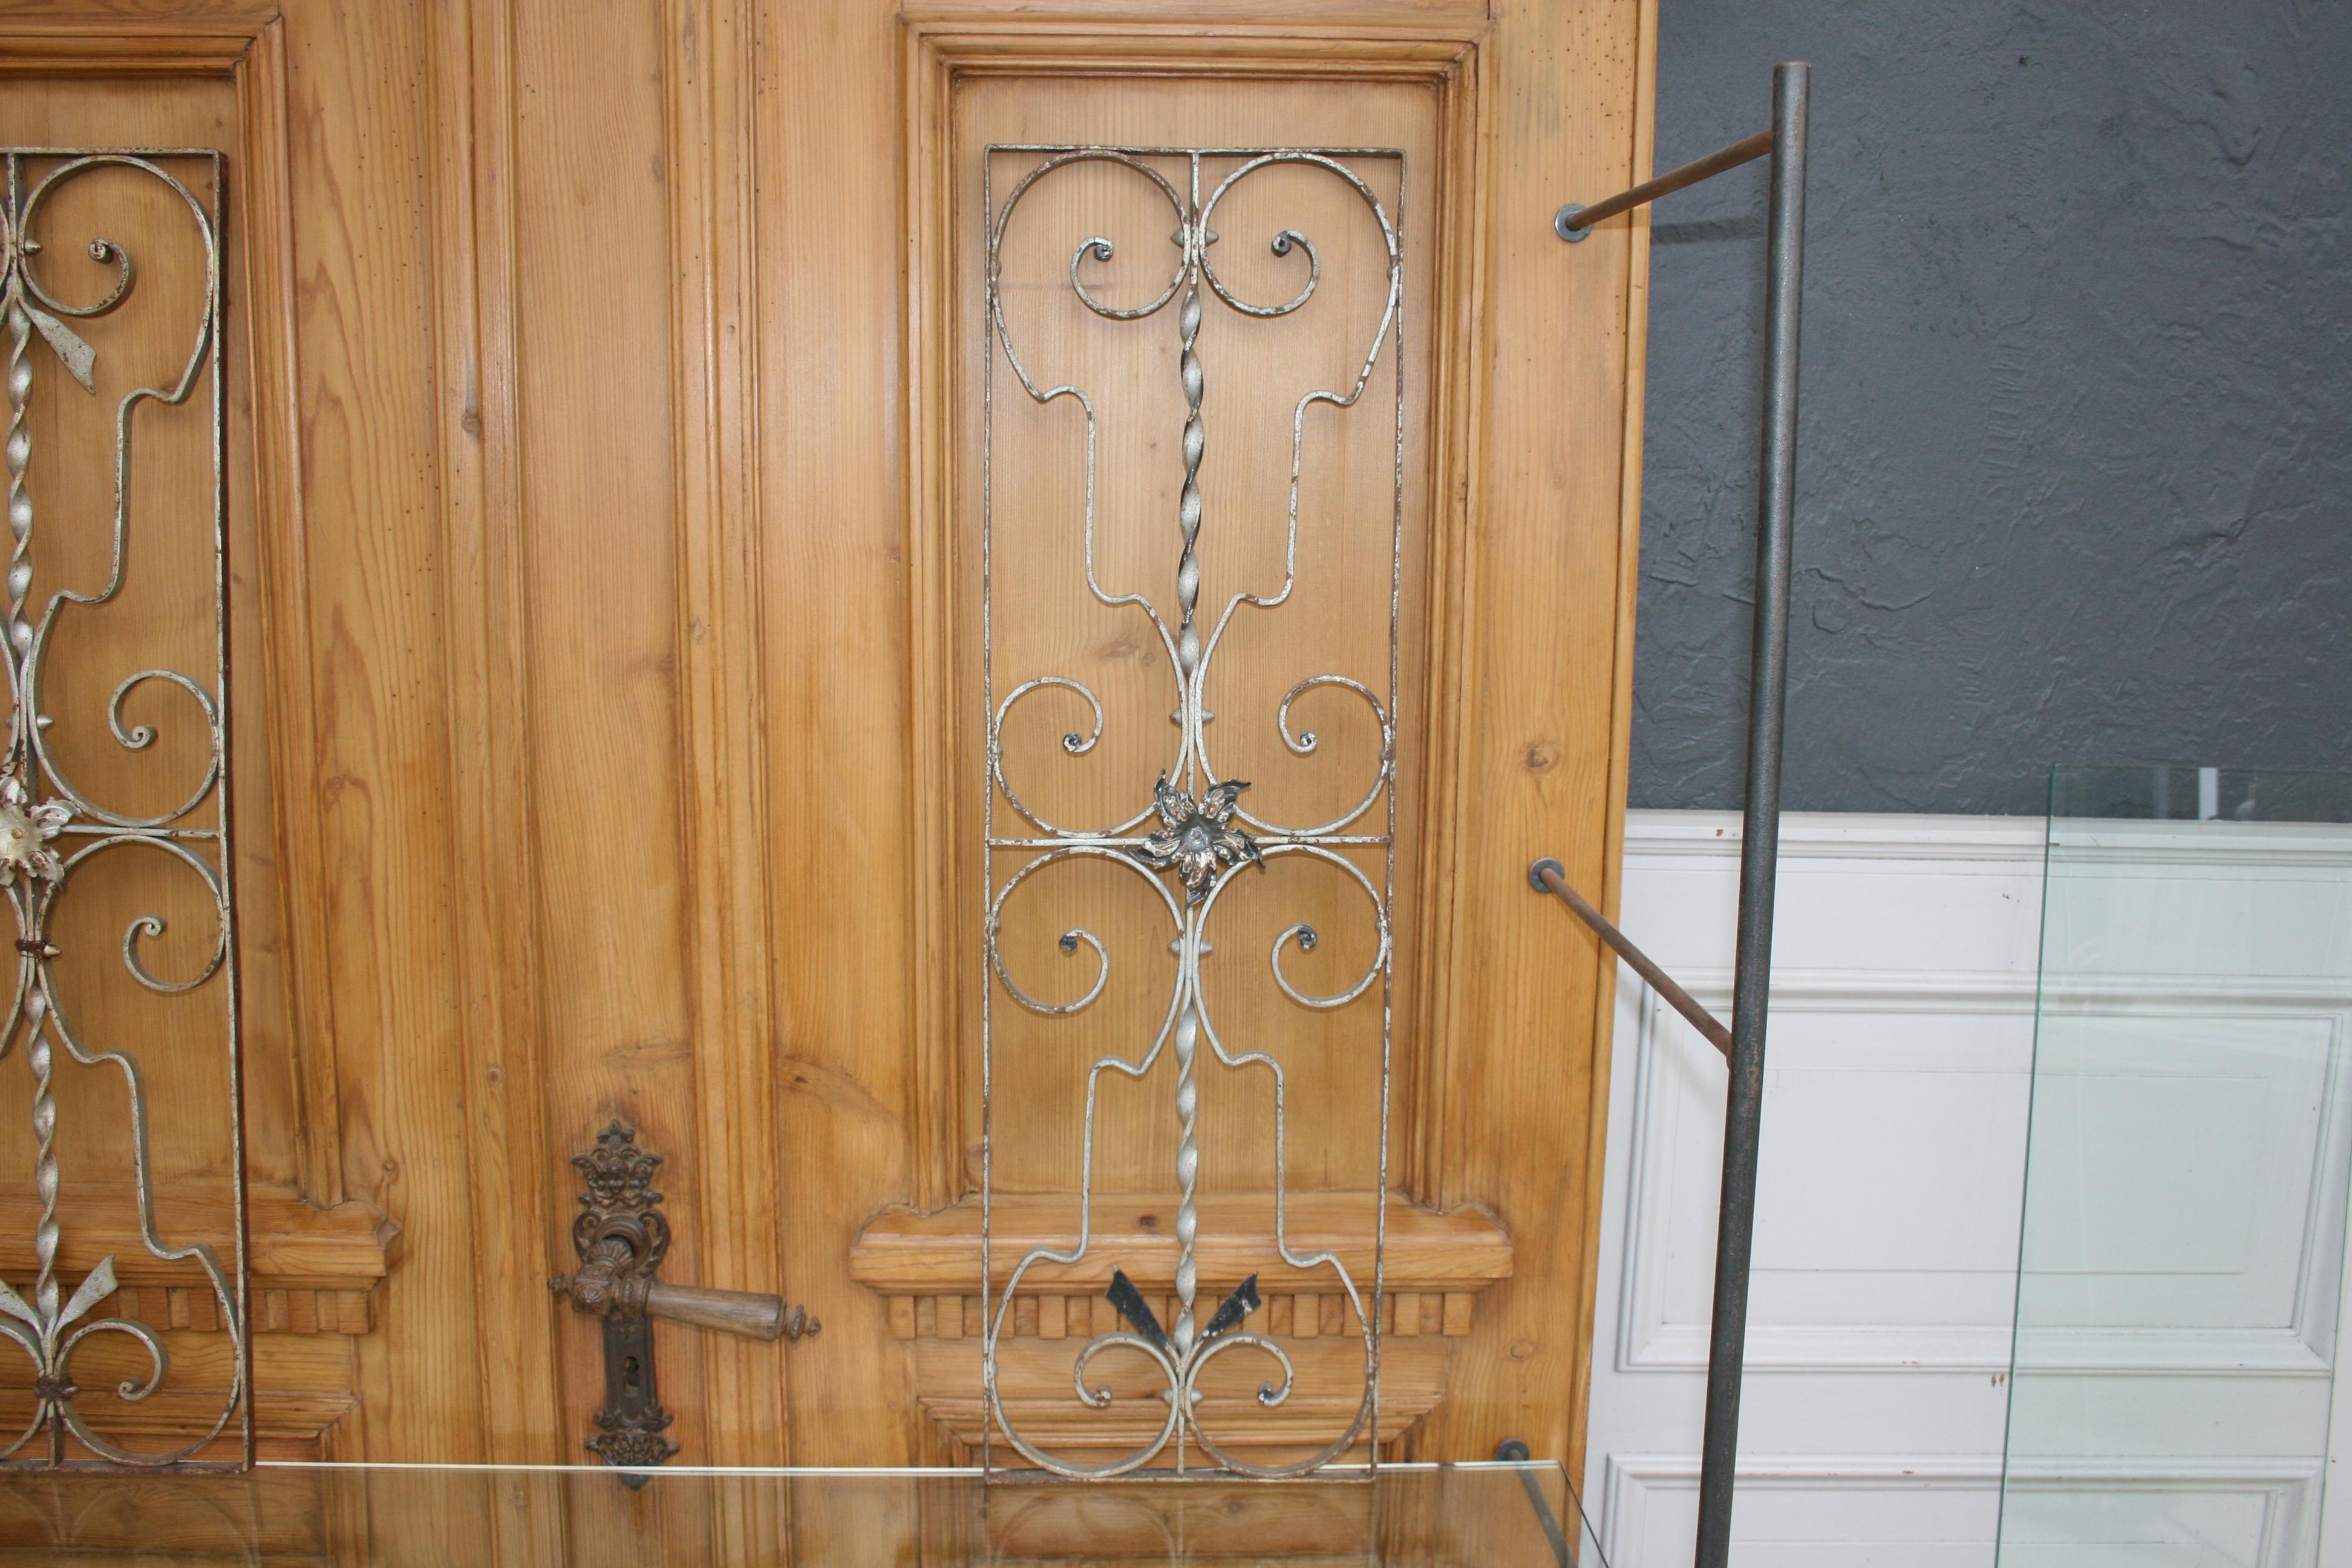 A pair of iron door grills or grates. Also very decorative as an object hanging on the wall.

Dimensions:
87 cm high / 34.25 inch high,
26.5 cm wide / 10.43 inch wide,
1.5 cm deep / 0.59 inch deep.